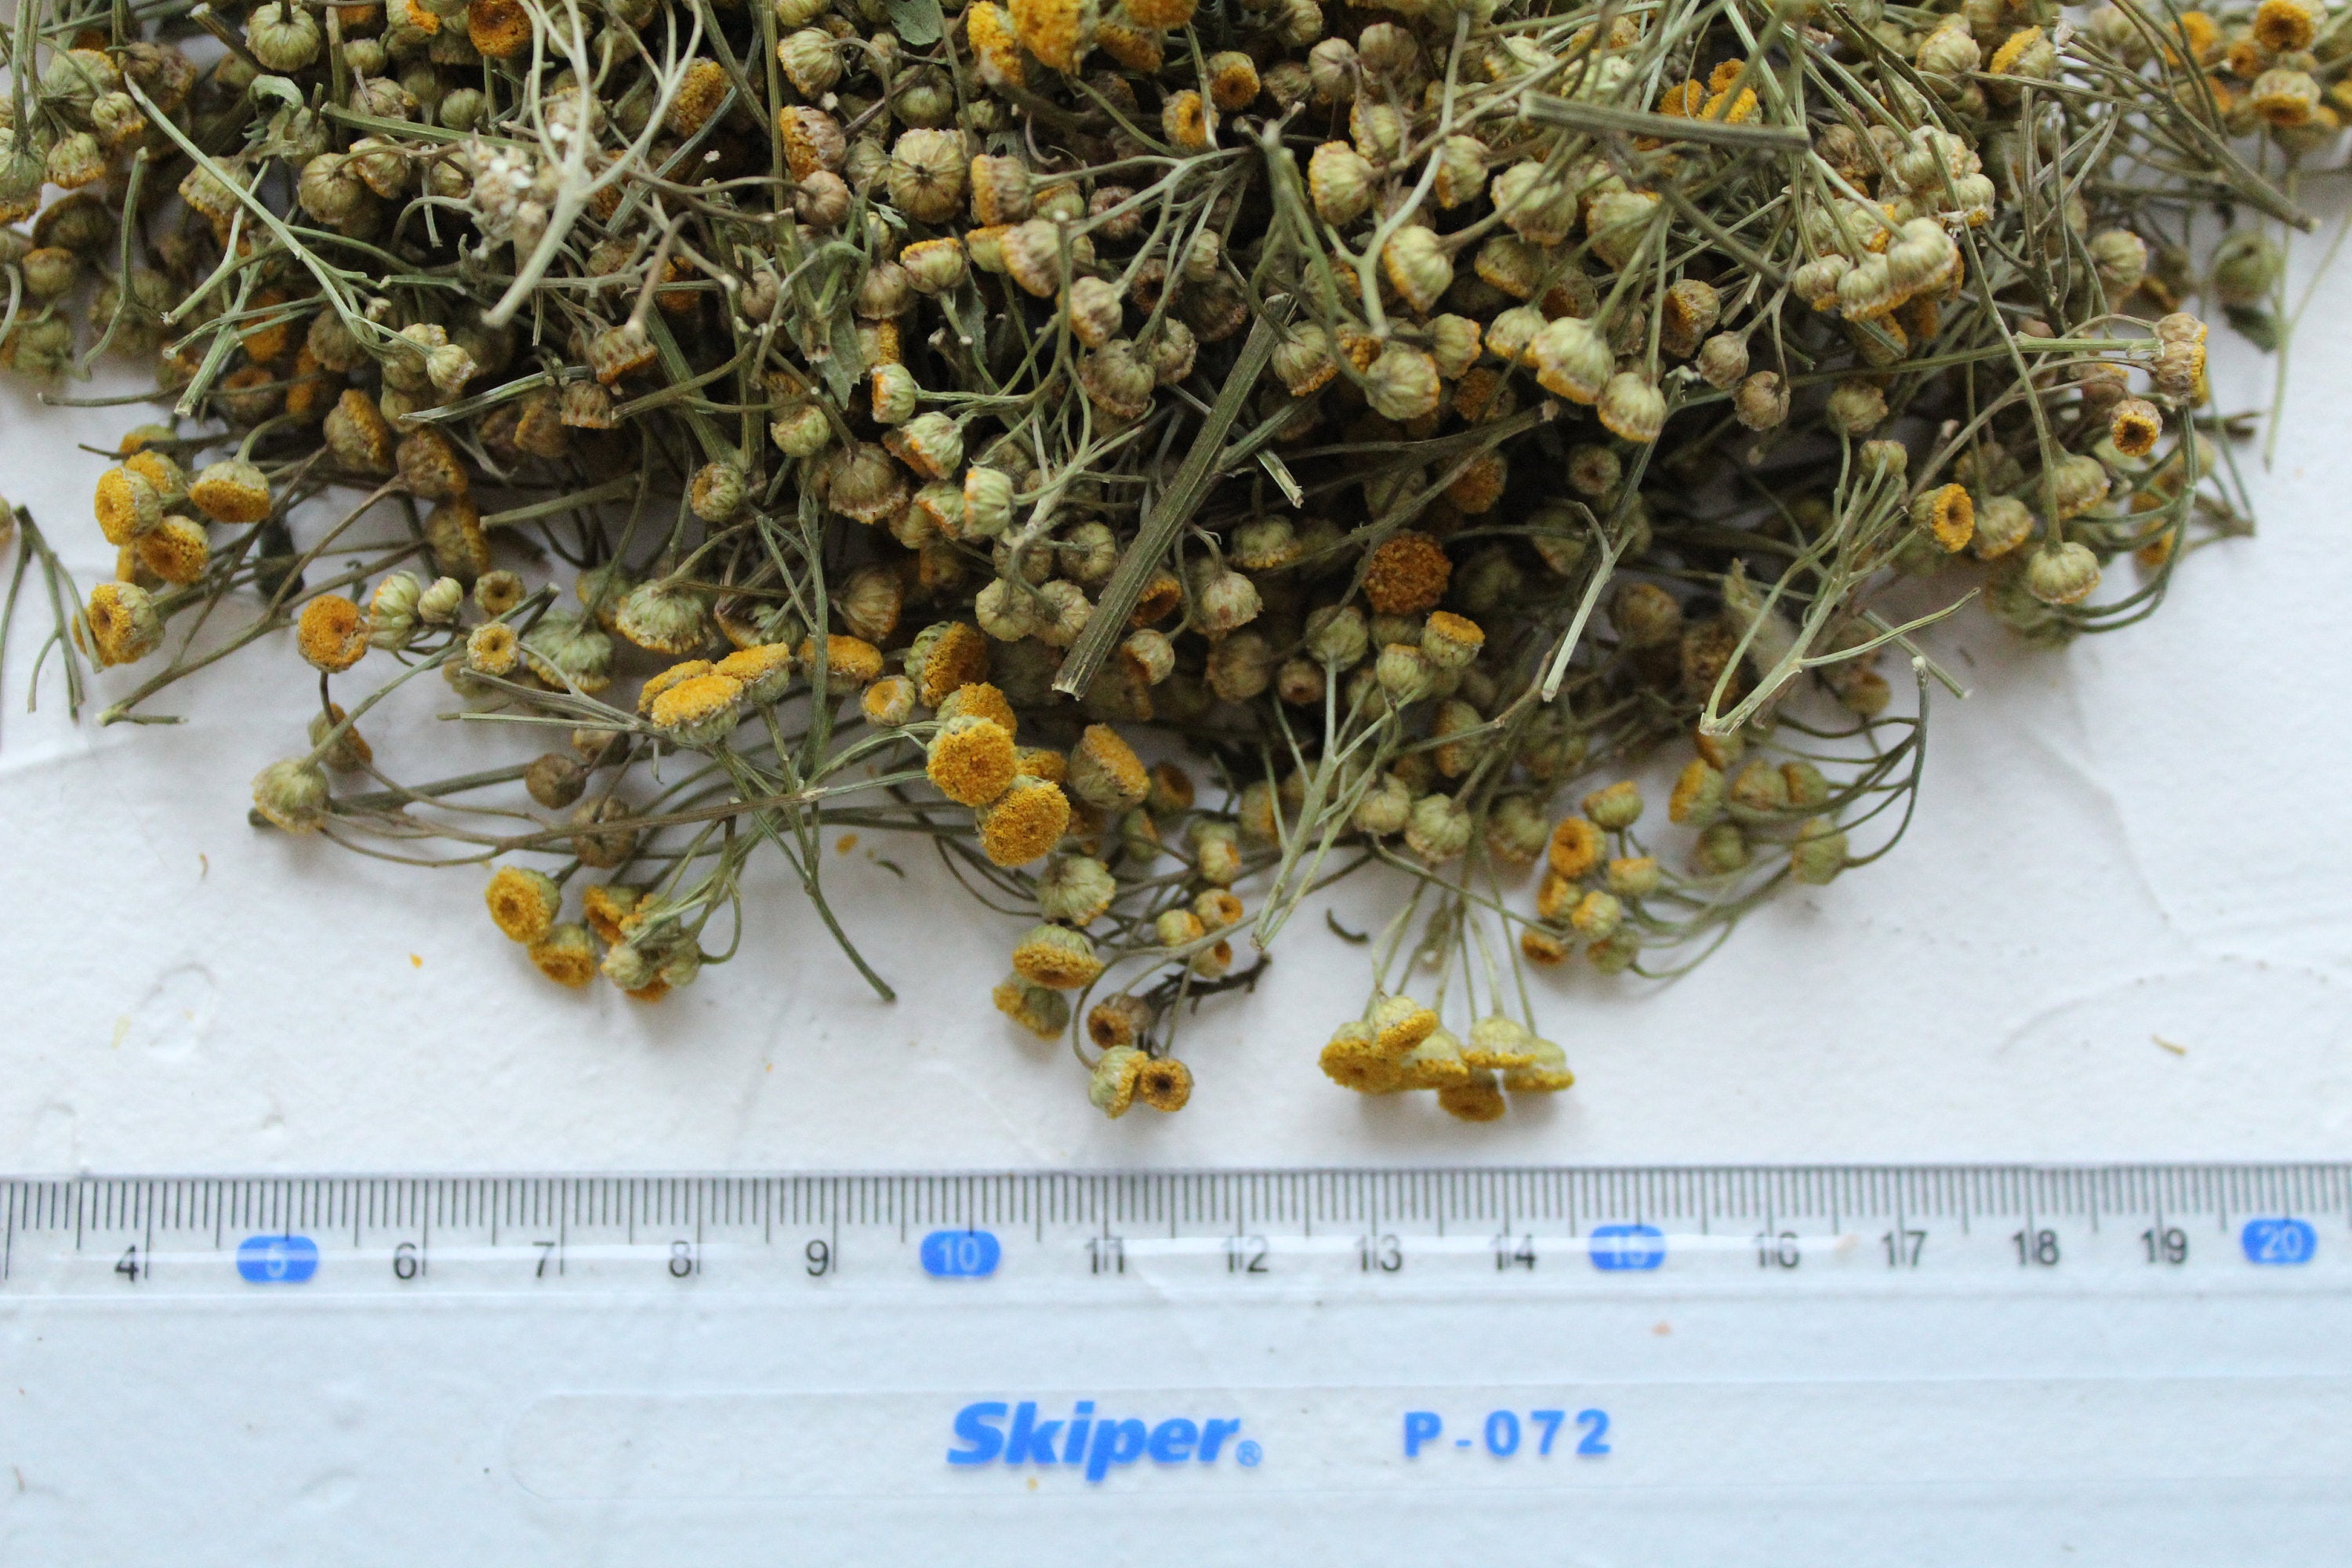 250 grams of Dried tansy flowers, Tanacetum Vulgare, Natural, Organic, Craft, Confetti, Wedding toss, Wedding confetti, Soap making